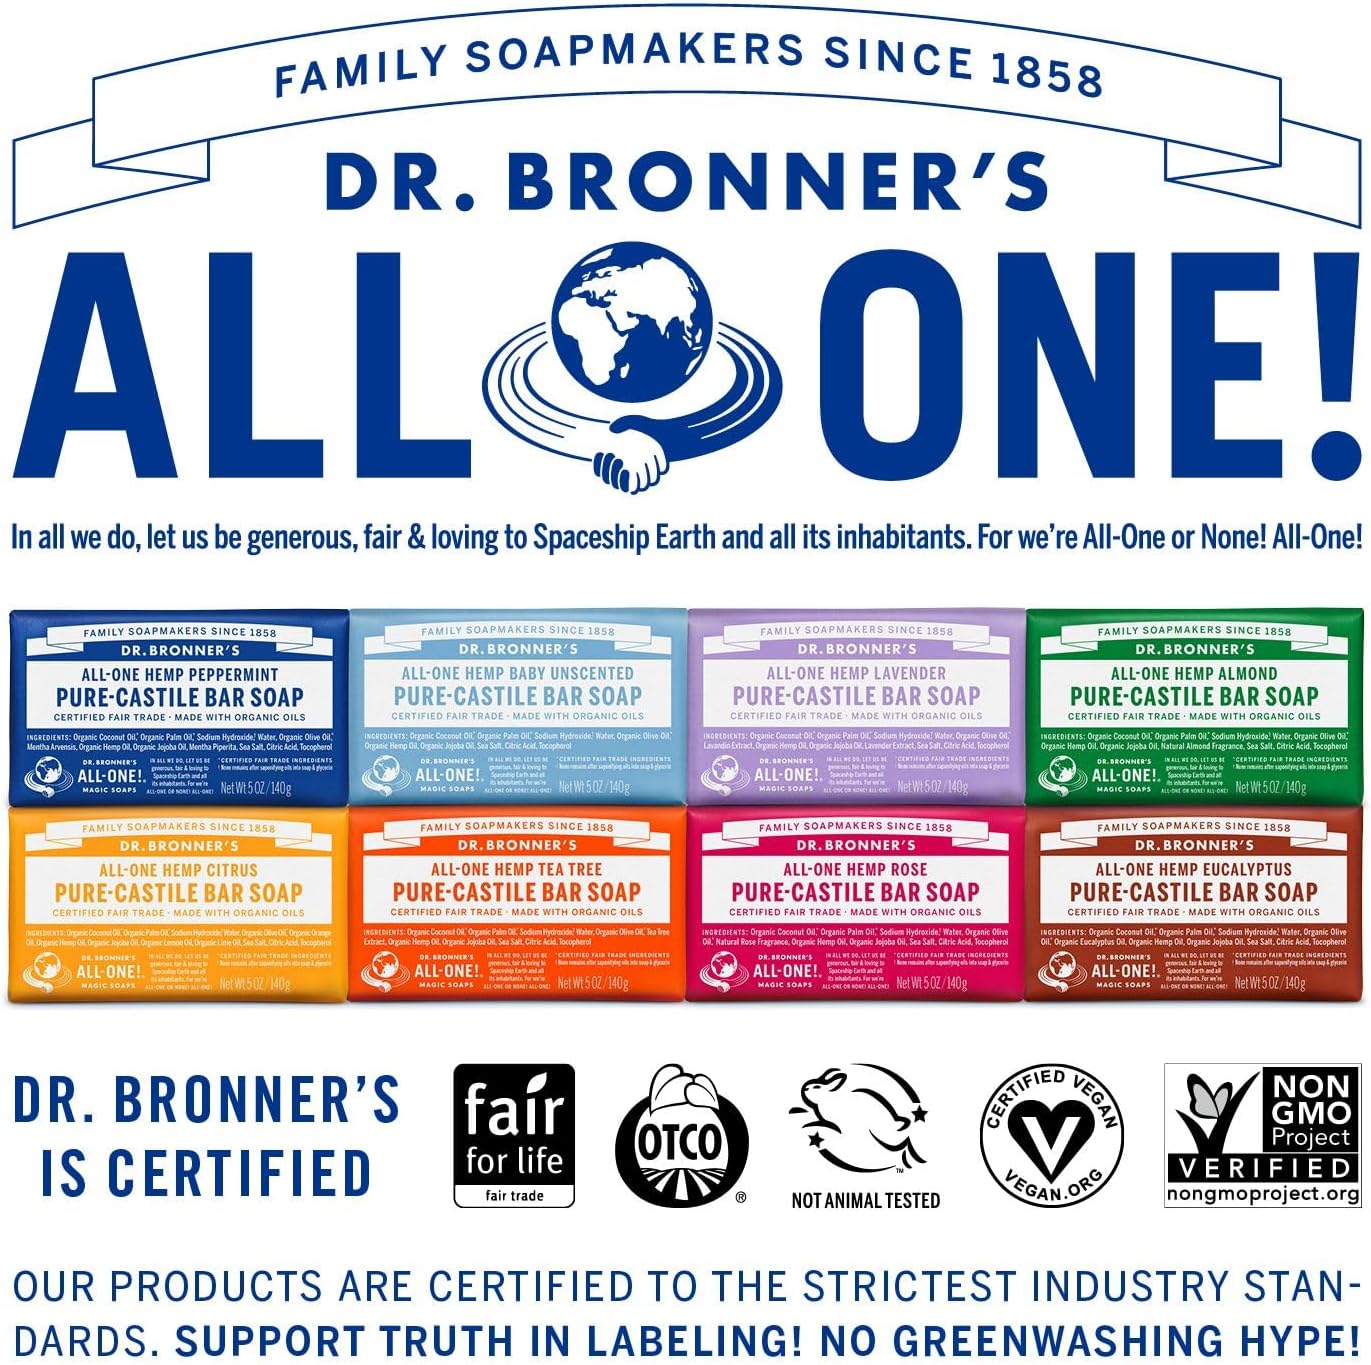 Dr. Bronner's - Pure-Castile Bar Soap (Peppermint, 5 ounce) - Made with Organic Oils, For Face, Body and Hair, Gentle and Moisturizing, Biodegradable, Vegan, Cruelty-free, Non-GMO : Baby Bar Soaps : Beauty & Personal Care